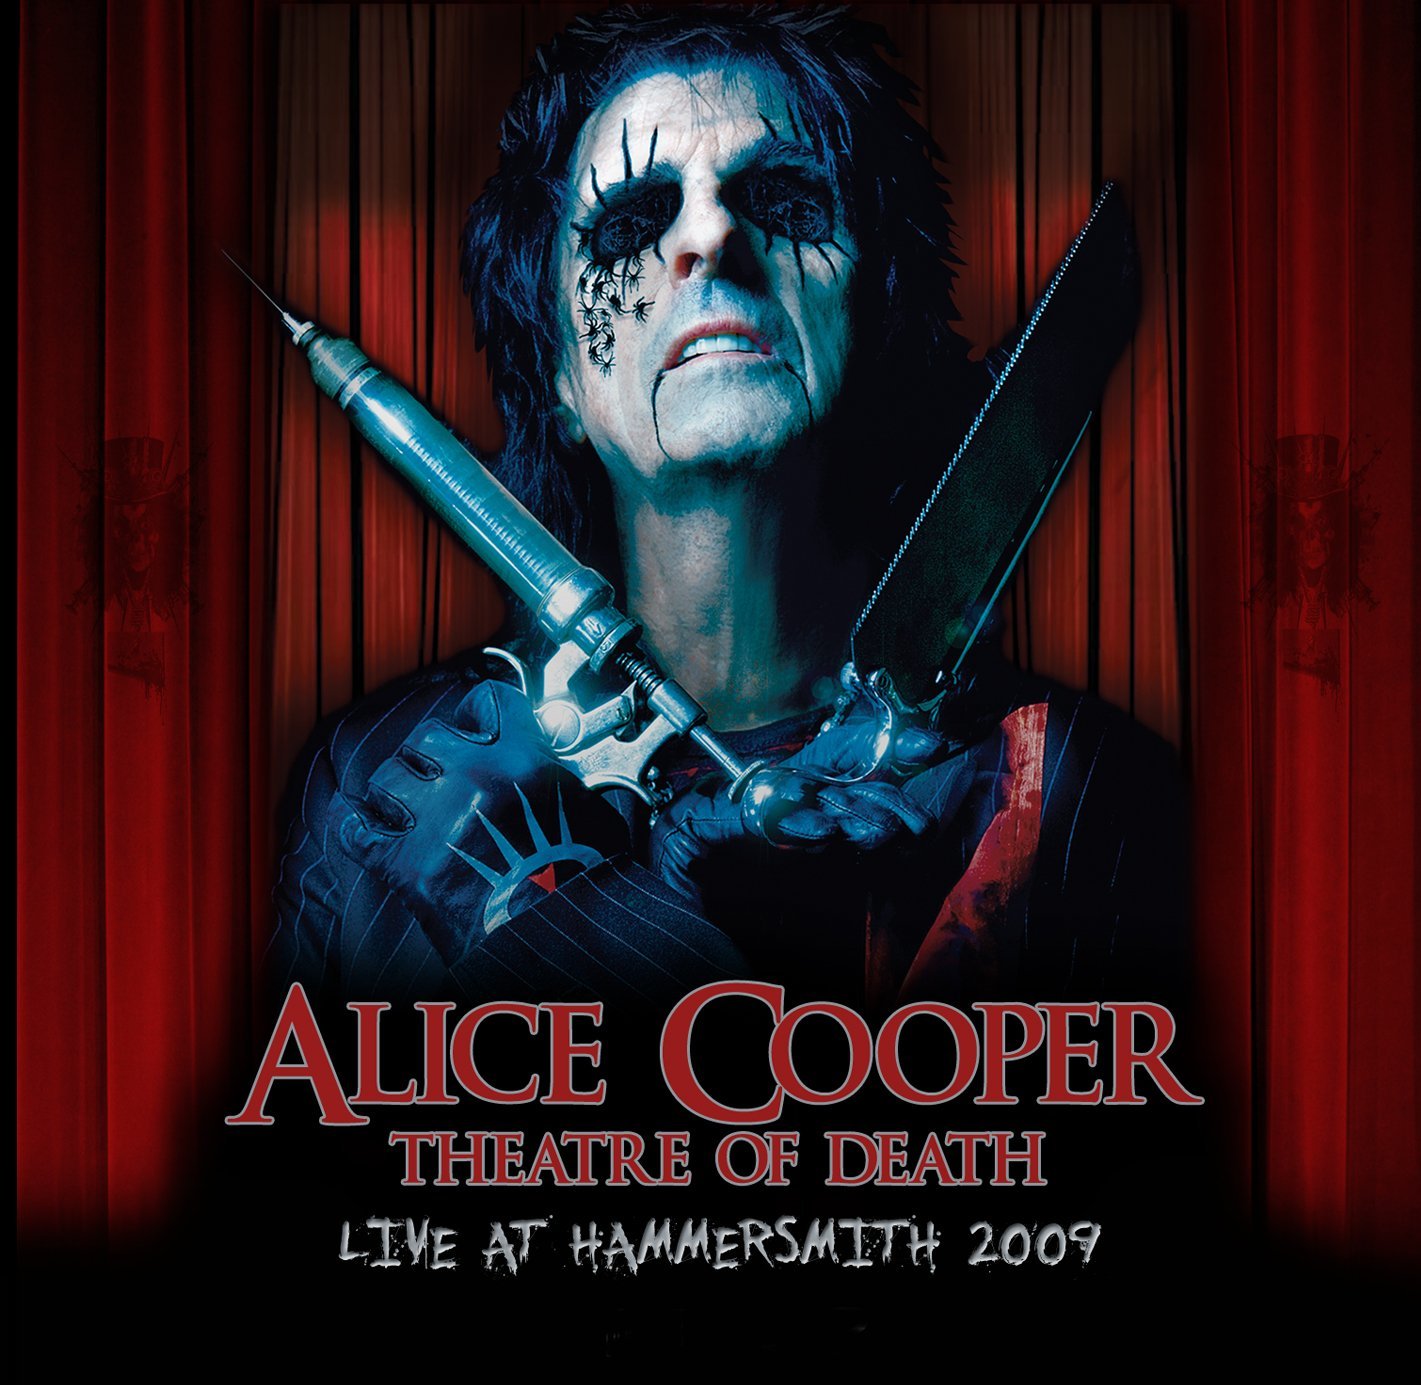 Theatre of death: Live at Hammersmith 2009